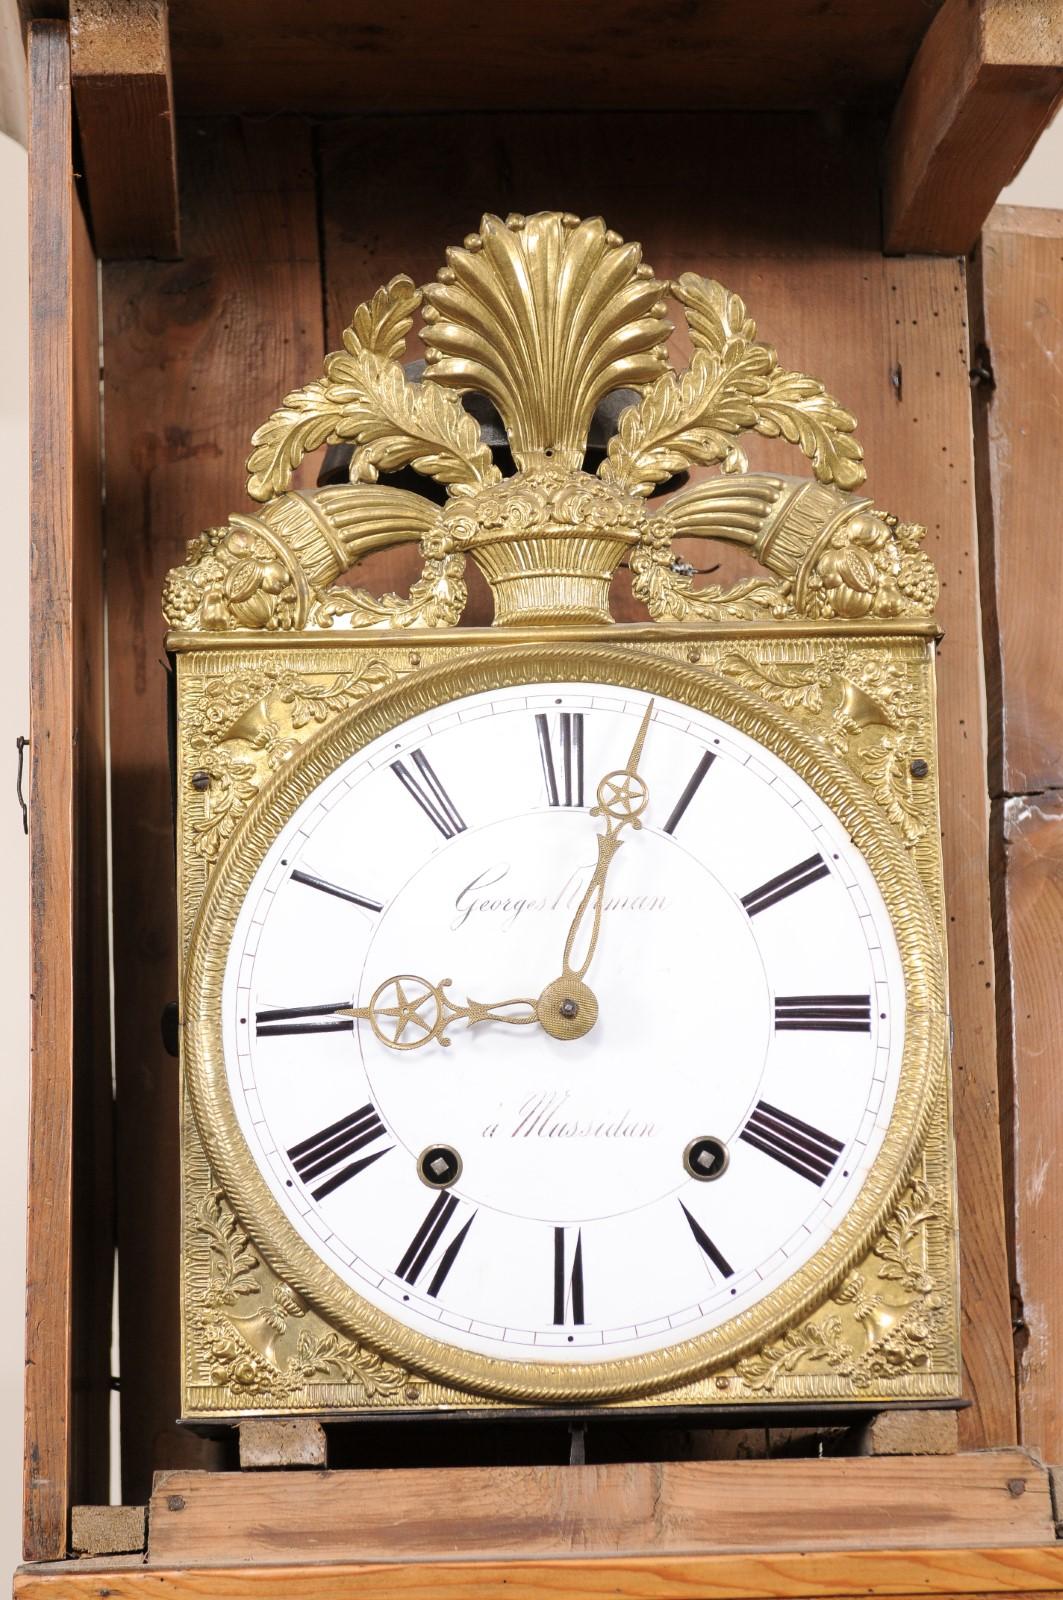 19th Century Pine Tallcase Clock with Pressed Gilt Metal Face & Enameled Dial, signed “George Herman, France”